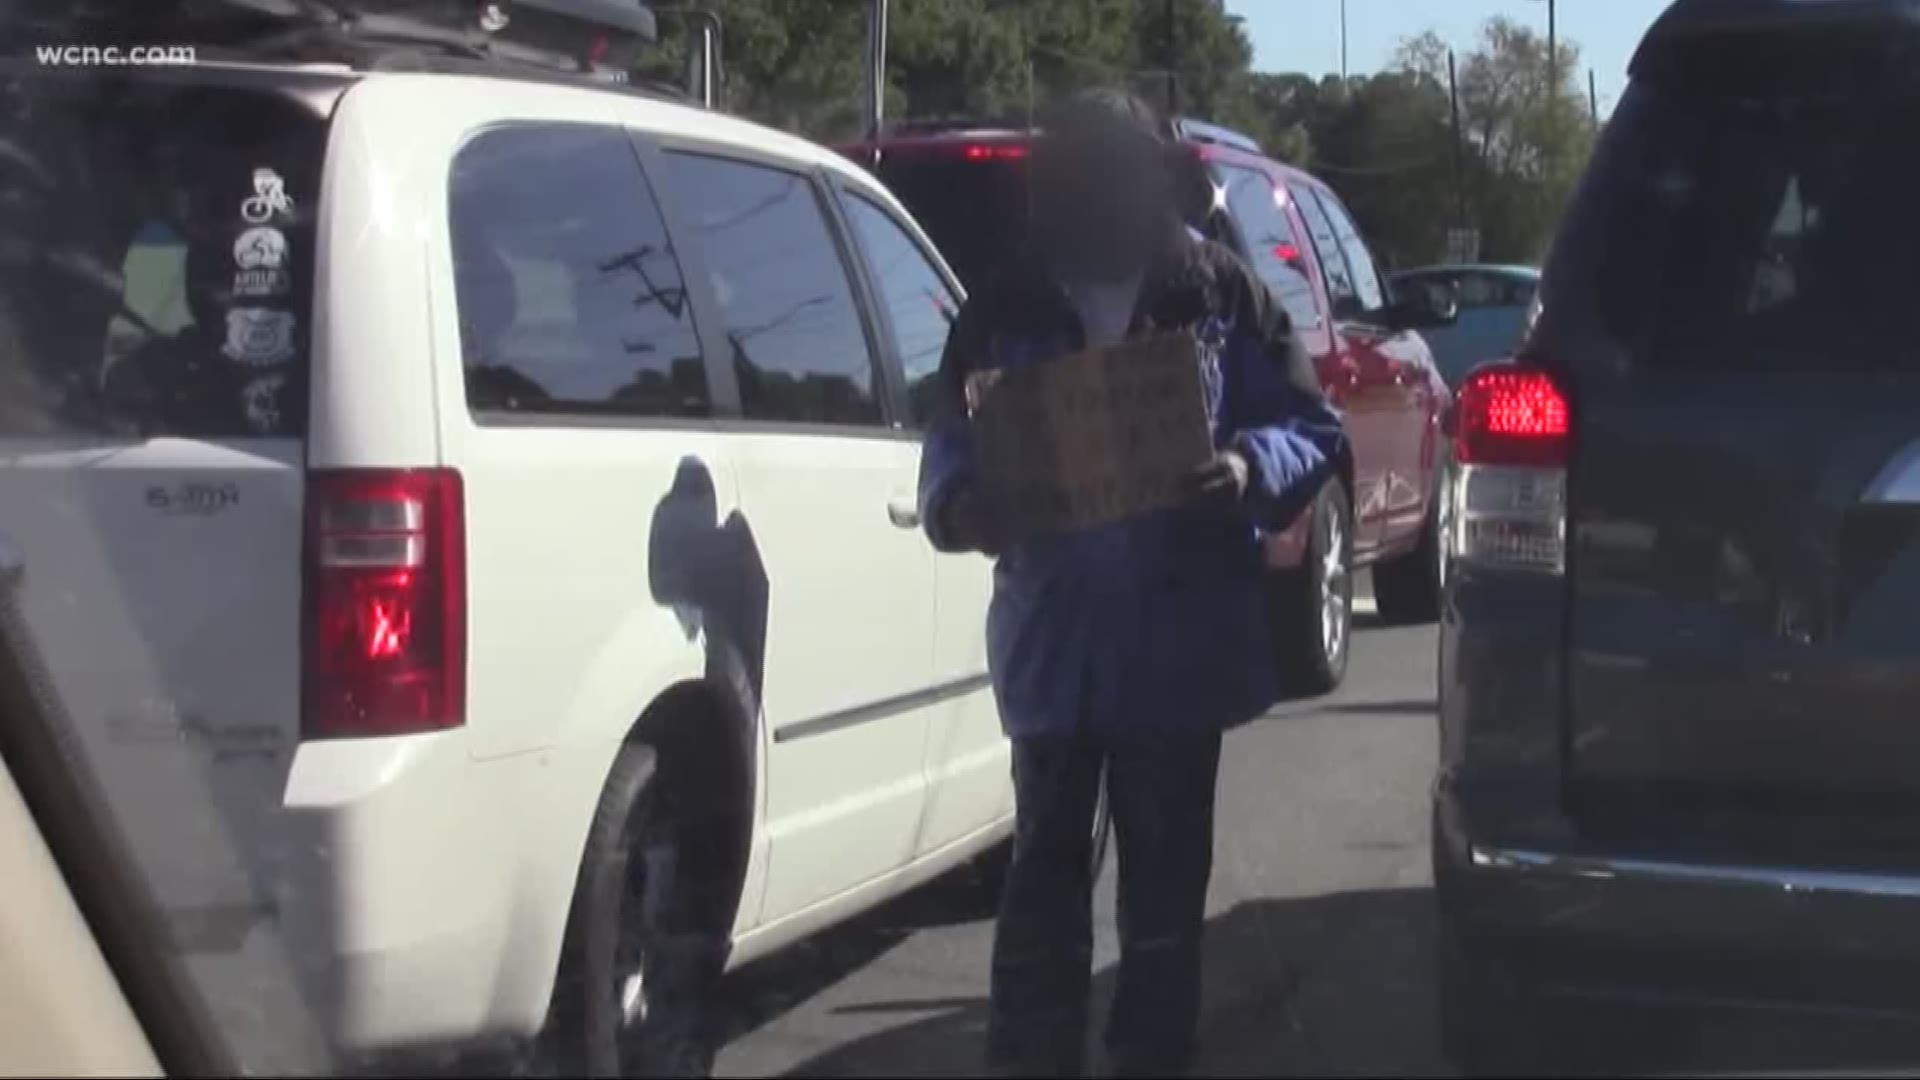 NC cities cracking down on panhandling